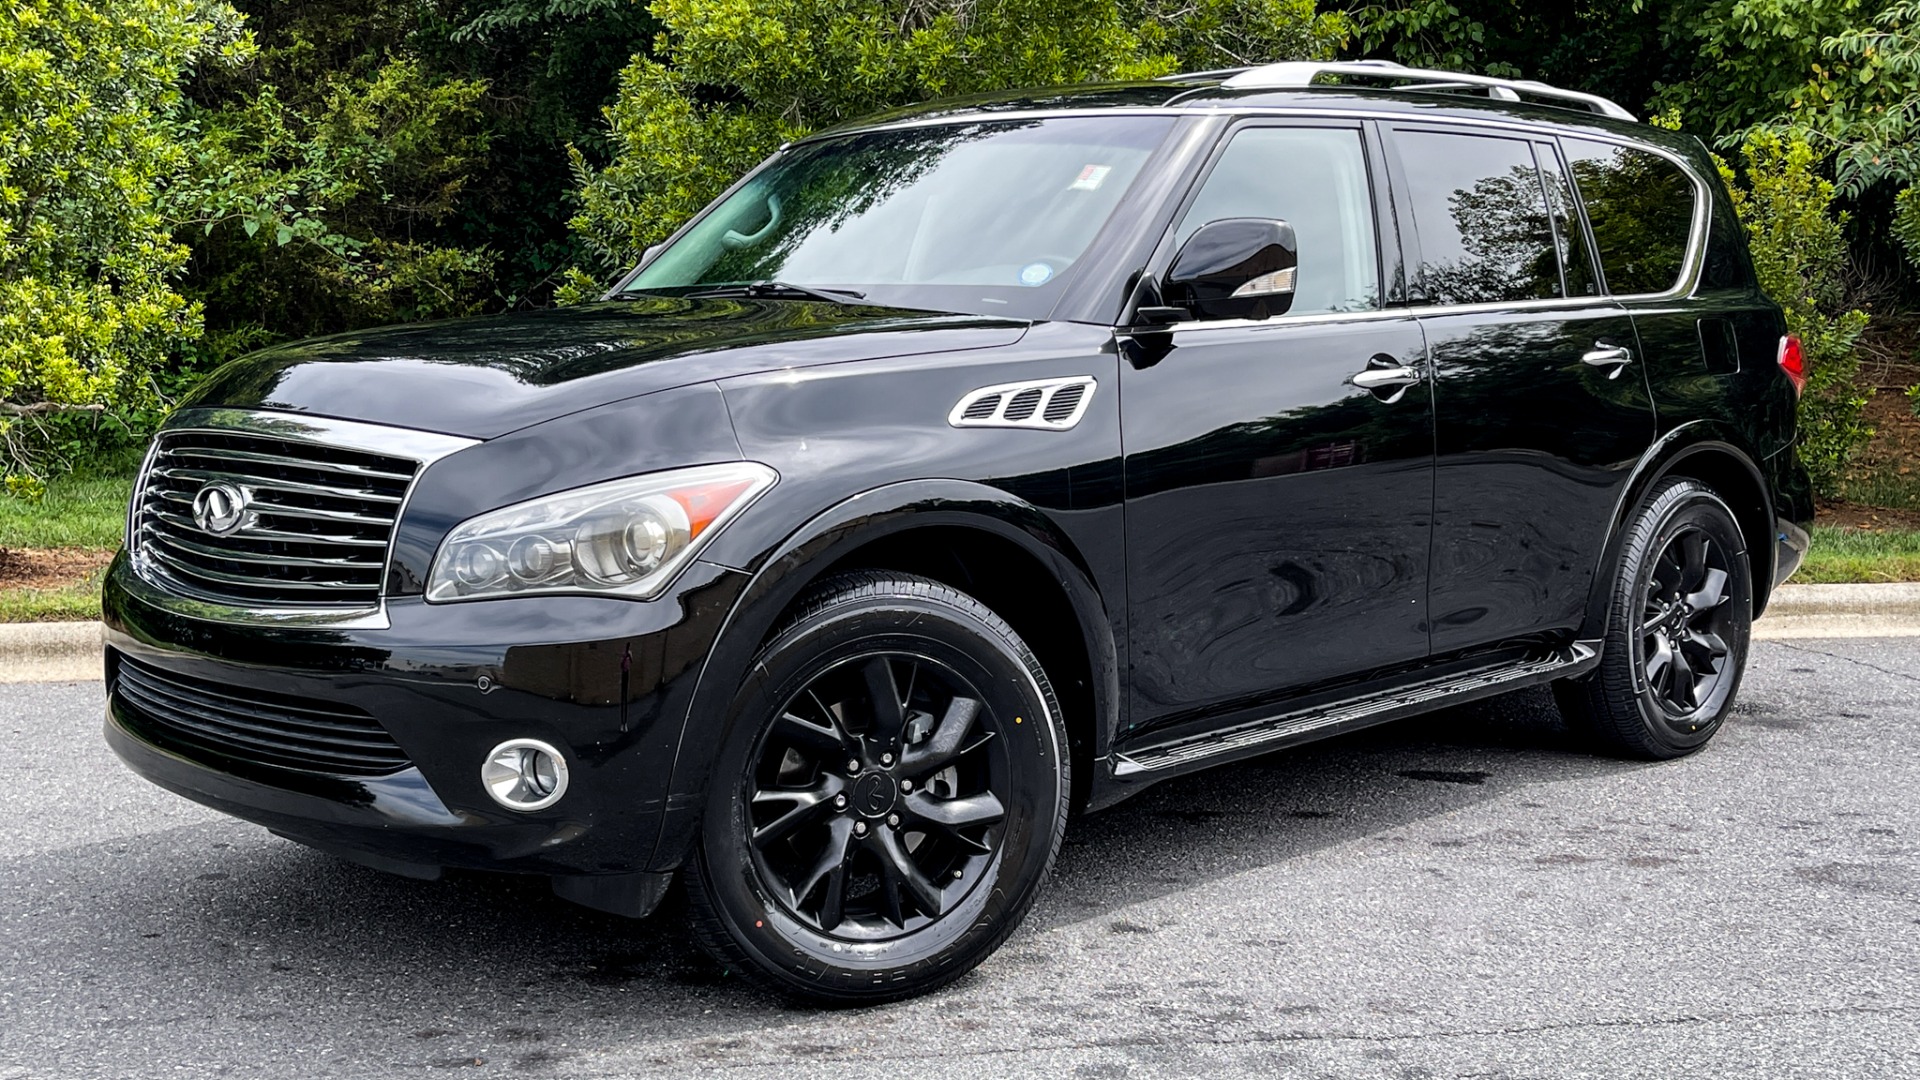 Used 2012 INFINITI QX56 7 PASSENGER / THEATER PACKAGE / HEATED SEATS / NAV / REARVIEW for sale $17,900 at Formula Imports in Charlotte NC 28227 1